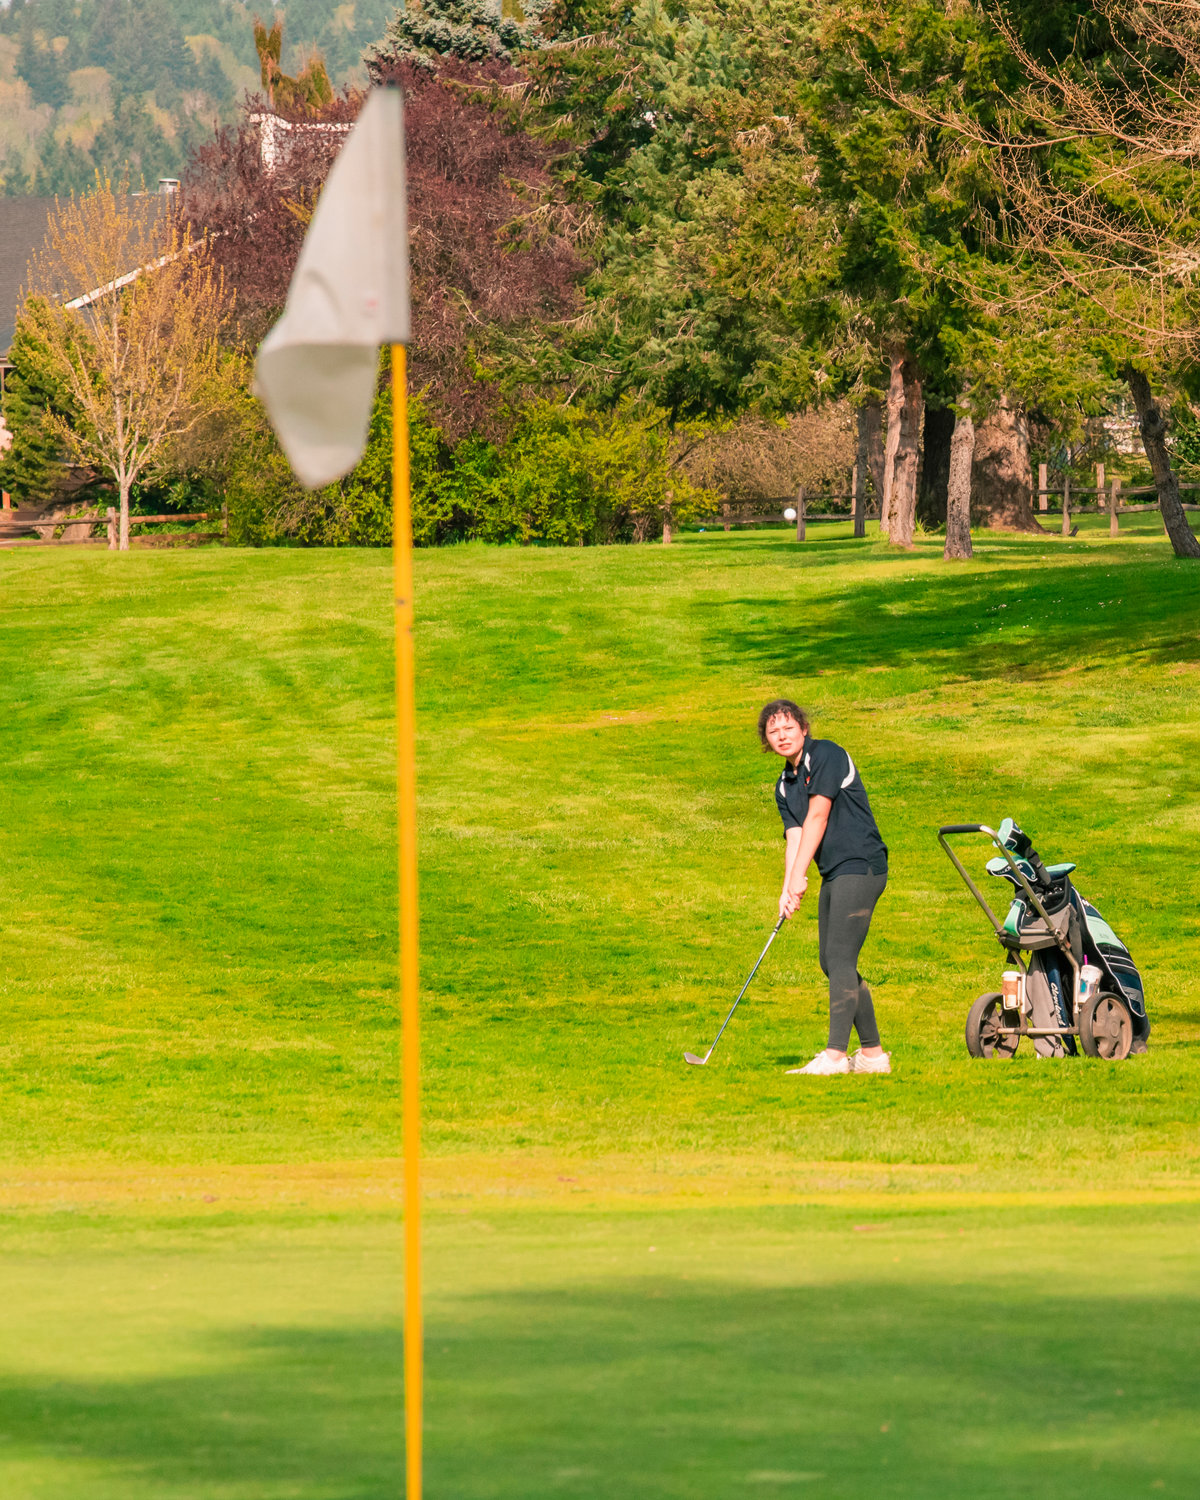 Mazzi Nowicki hits the ball towards the hole while playing at Riverside Golf Course in Chehalis.